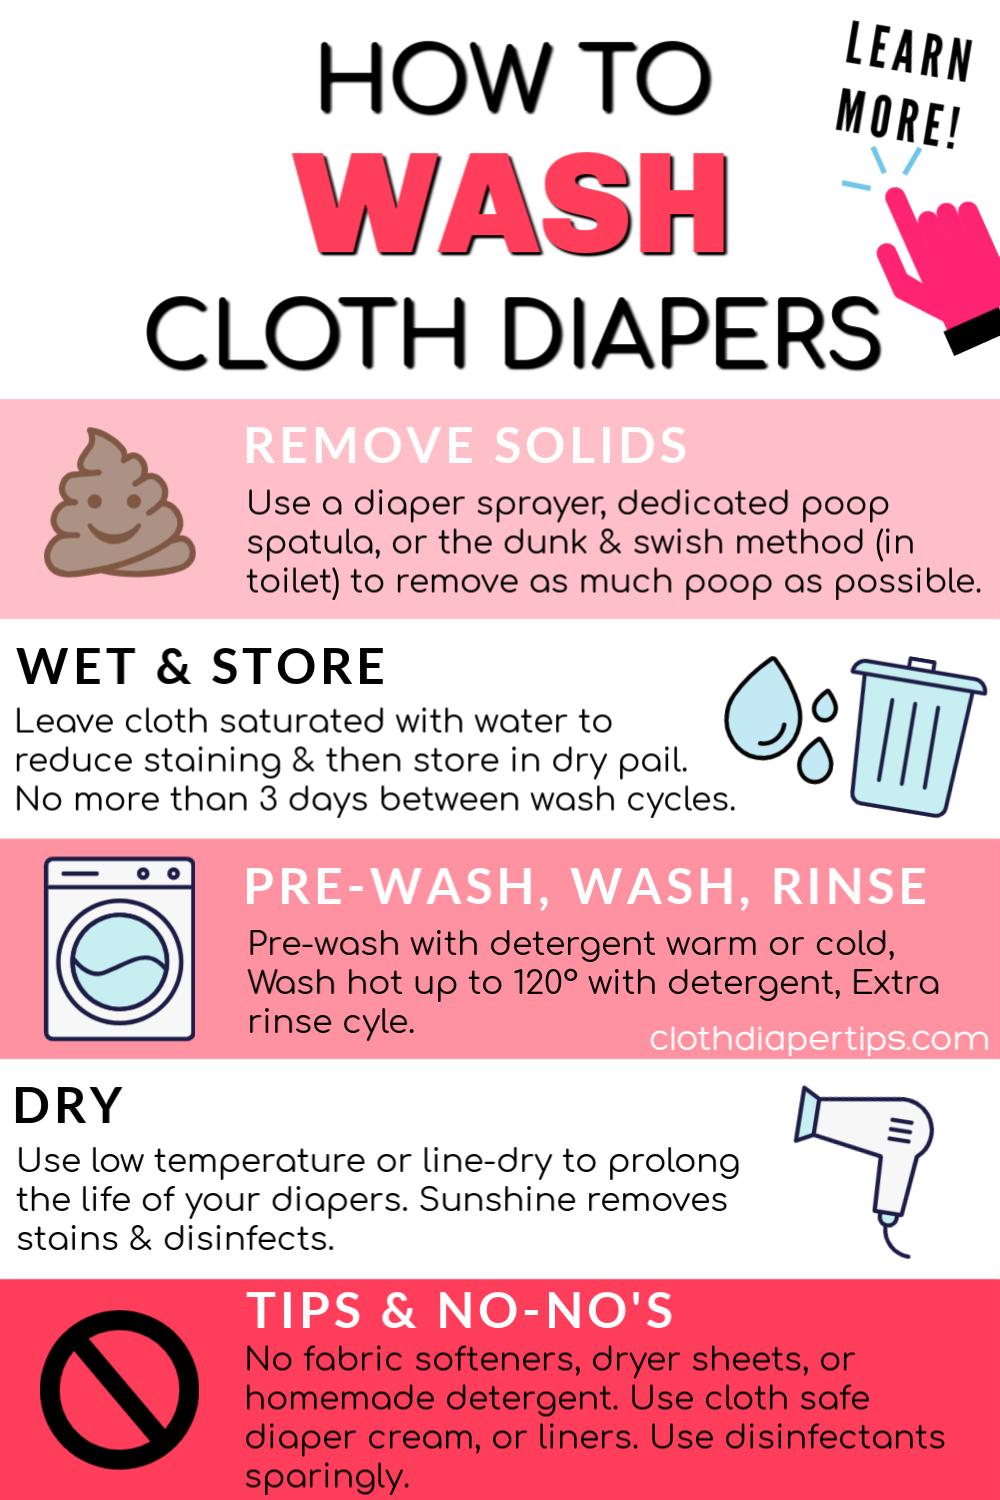 How to Wash Cloth Diapers: A Simple Starter Guide